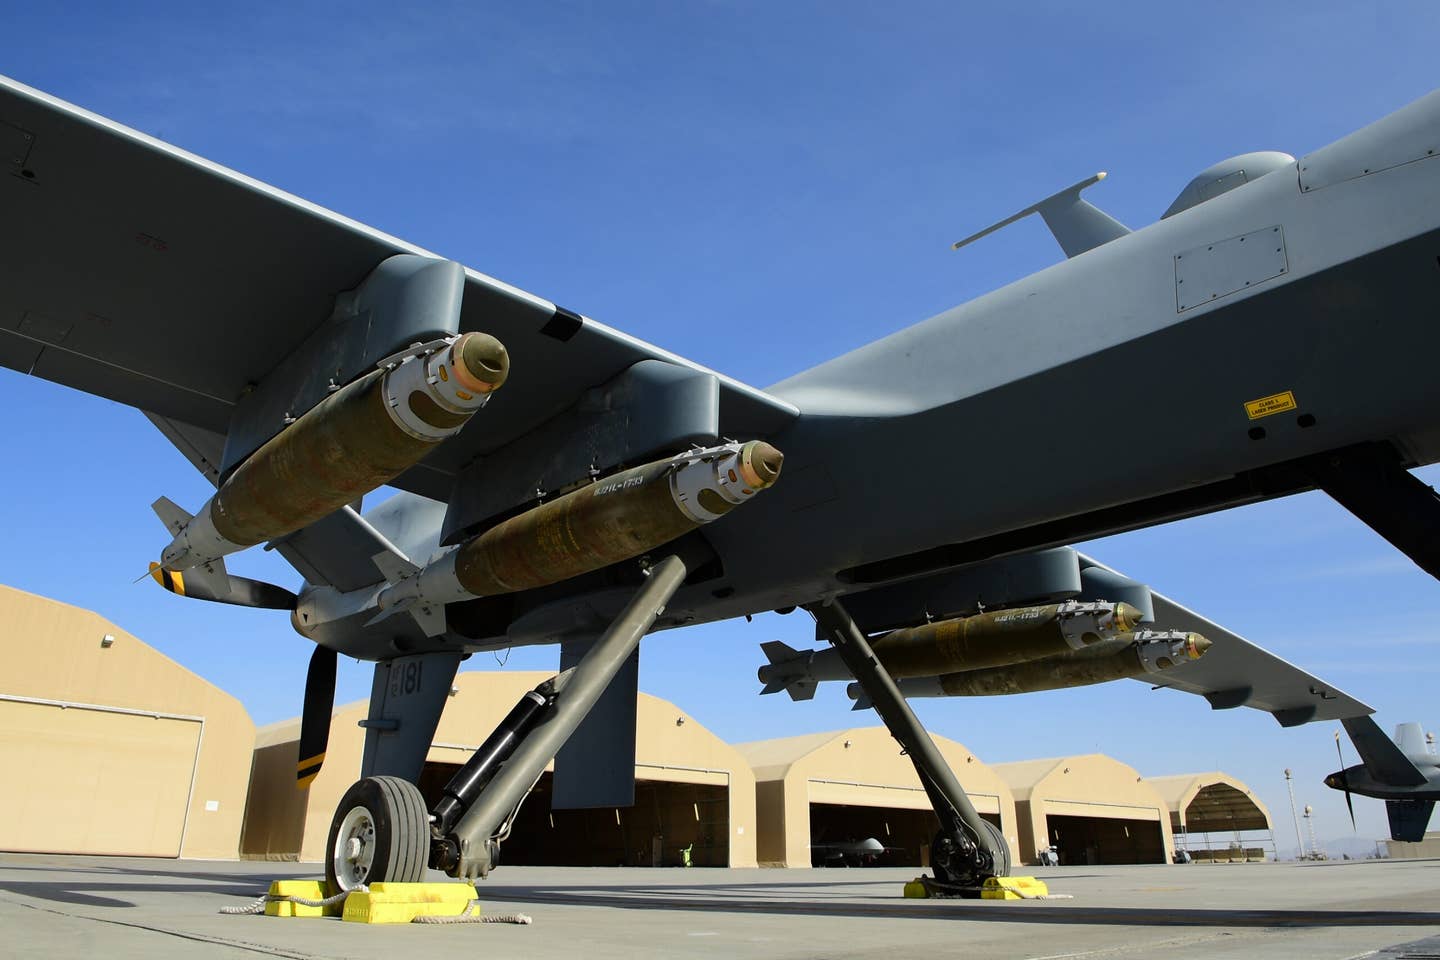 An MQ-9 Reaper, assigned to the 62nd Expeditionary Reconnaissance Squadron, armed with four GBU-38 JDAMs parks on a flight line. <em>Credit: U.S. Air Force Photo by Tech. Sgt. Paul Labbe</em>